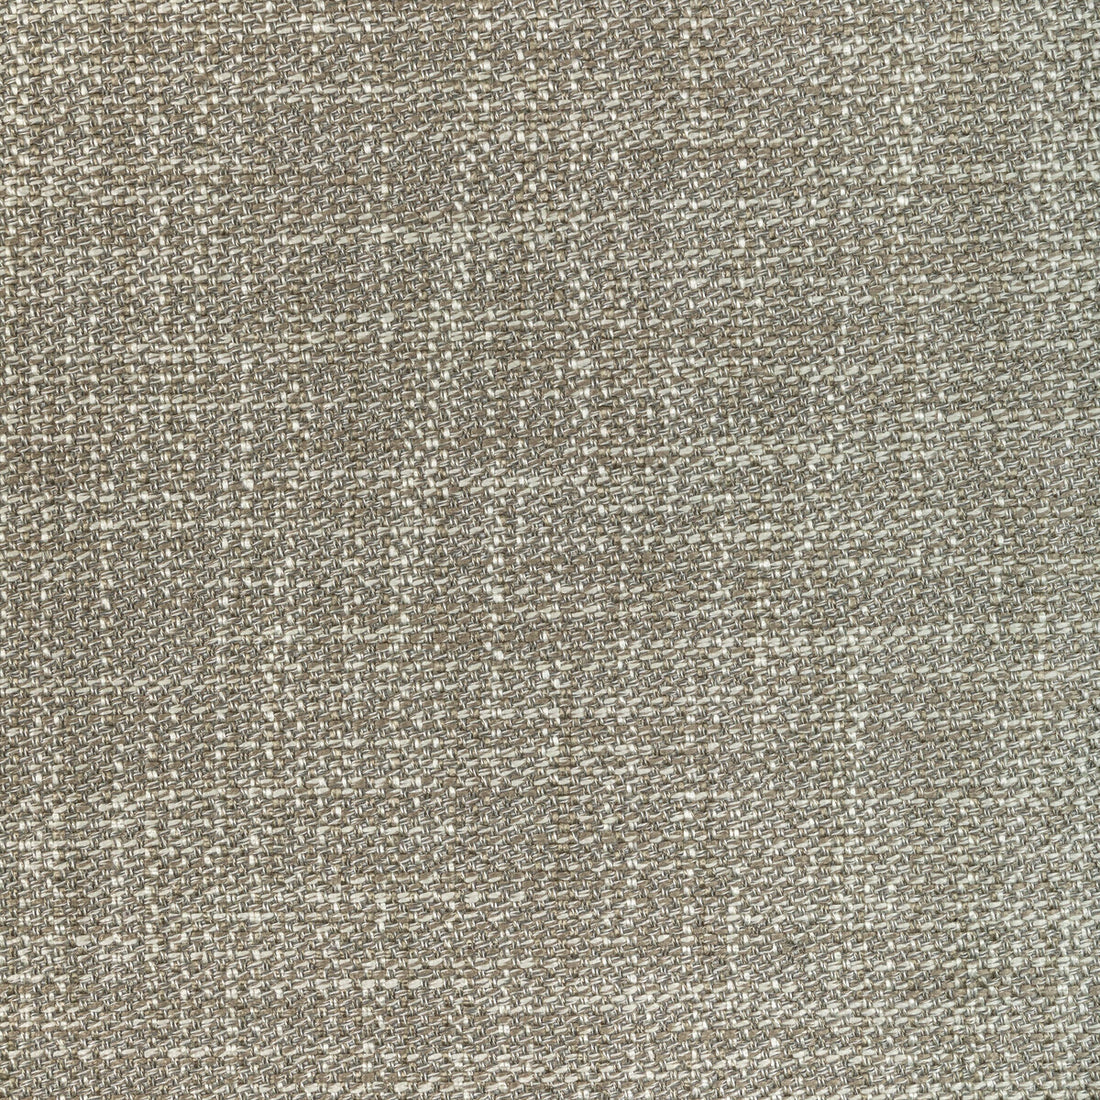 Kravet Design fabric in 36414-1101 color - pattern 36414.1101.0 - by Kravet Design in the Performance Crypton Home collection